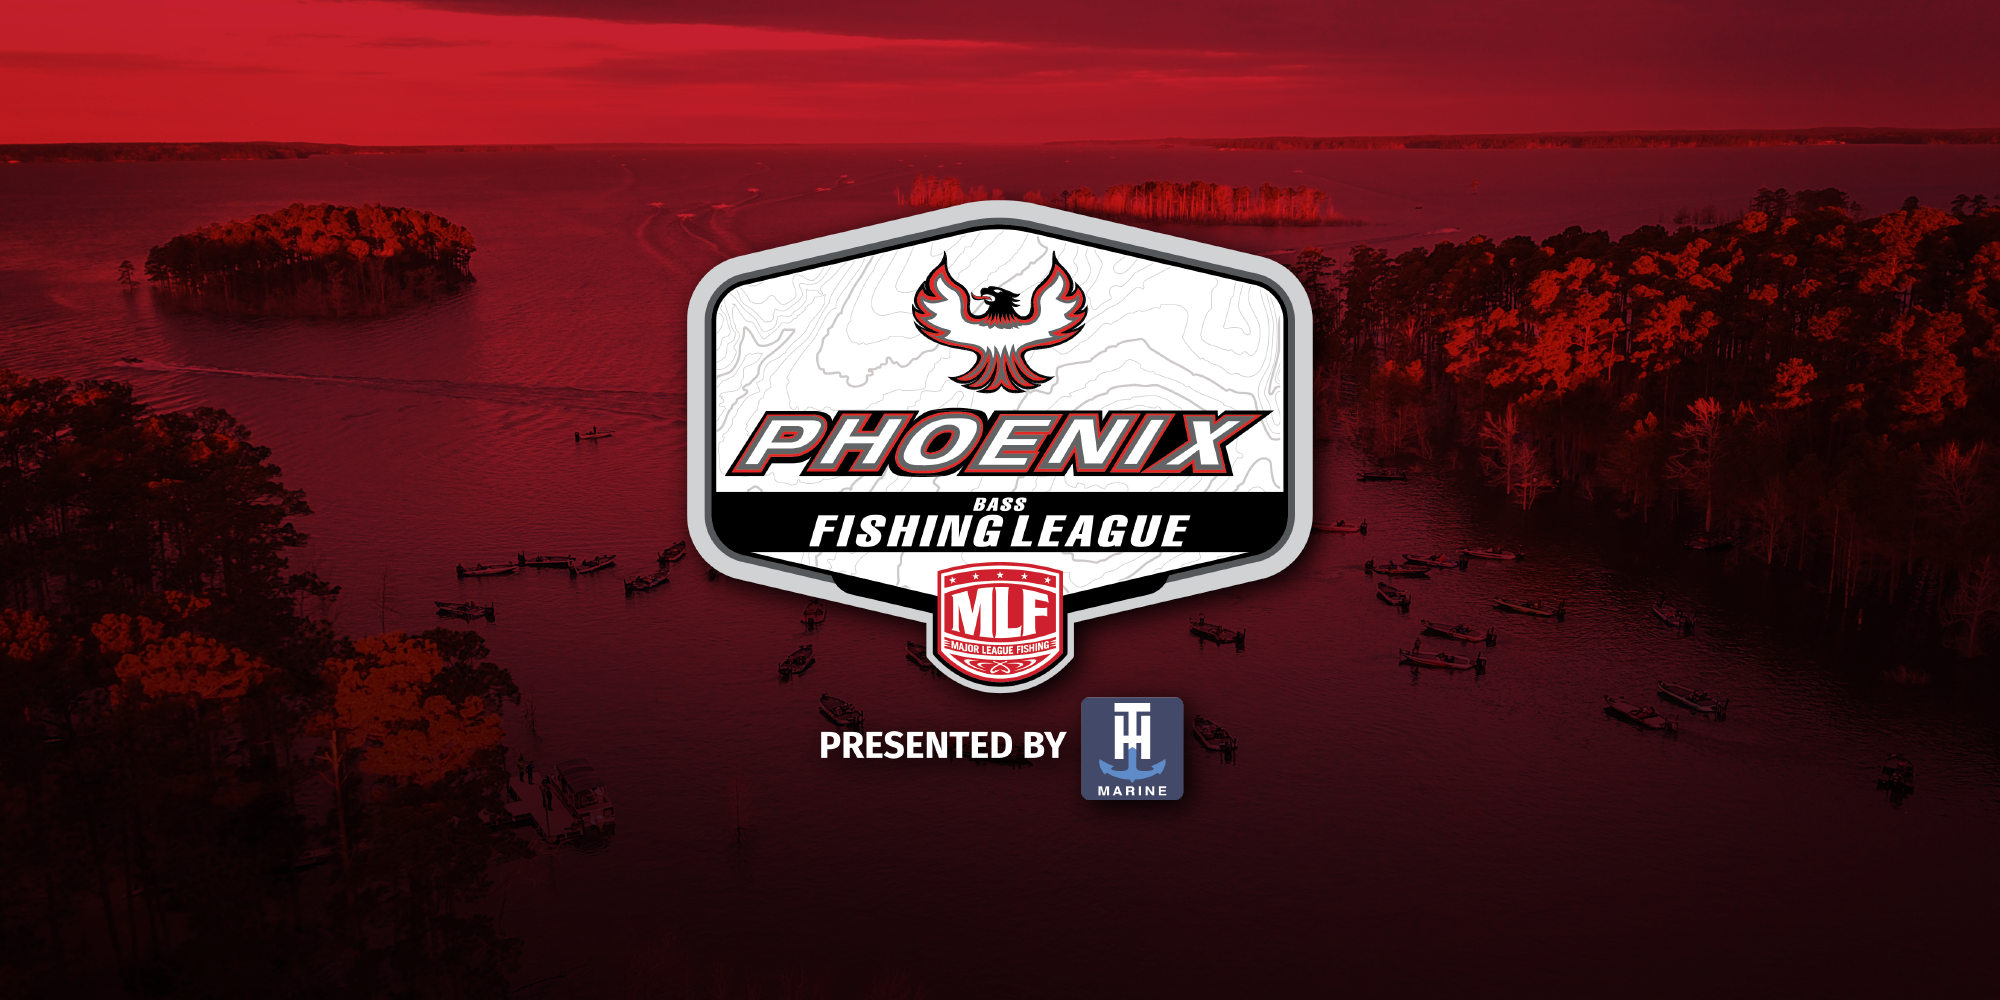 Marks crushes offshore to win Regional at Eufaula - Major League Fishing